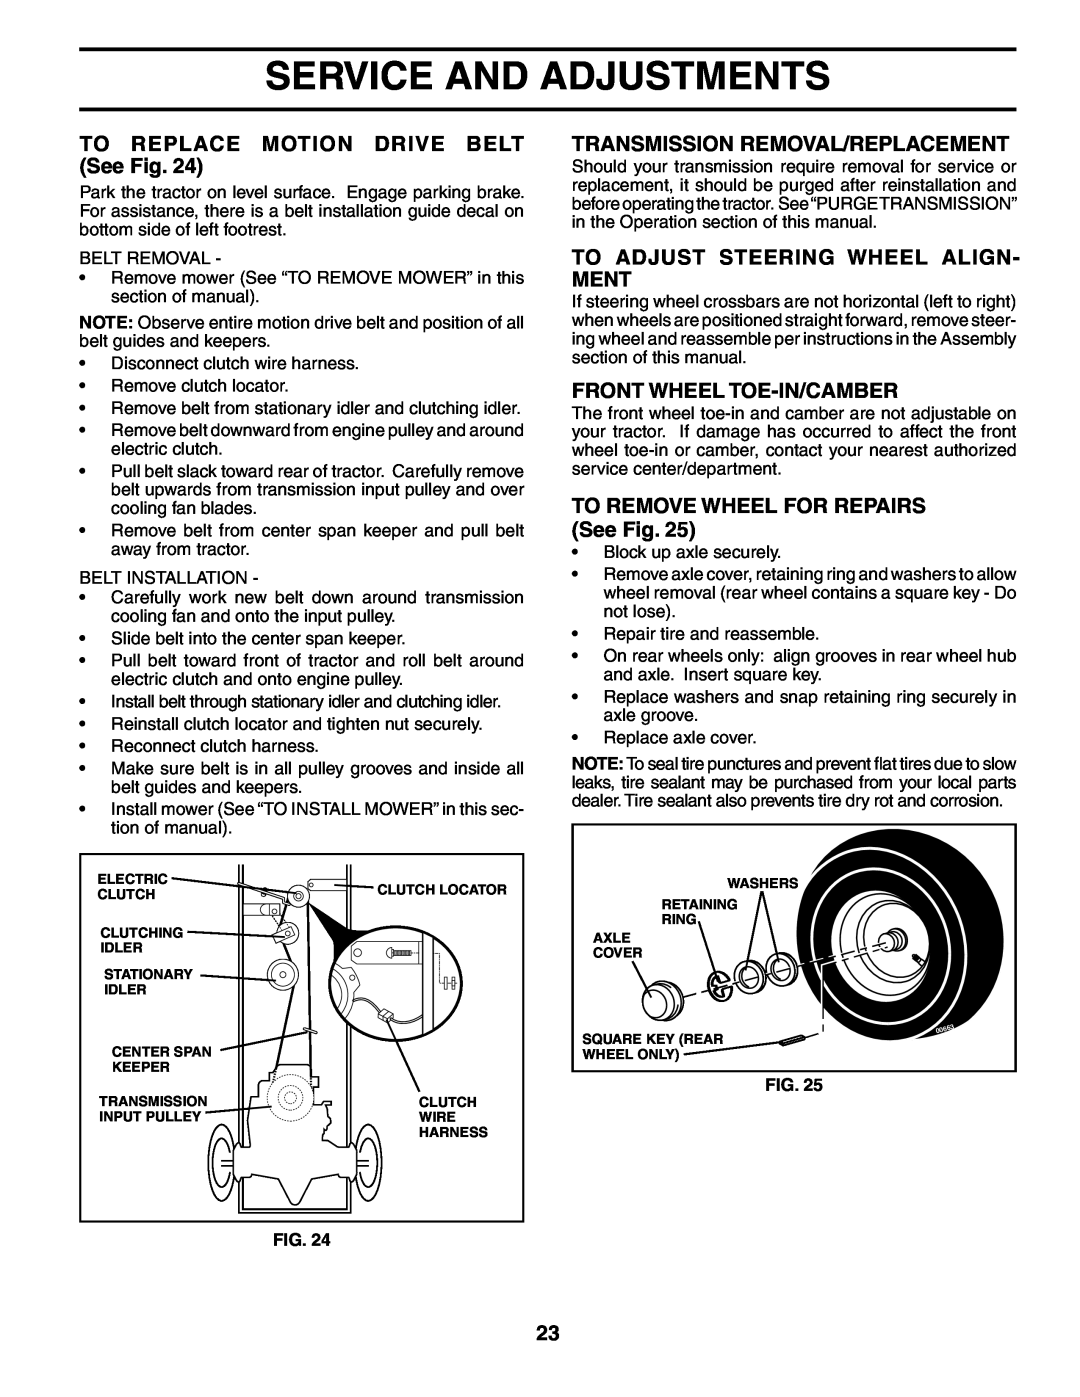 Poulan PD24PH42ST manual TO REPLACE MOTION DRIVE BELT See Fig, Transmission Removal/Replacement, Front Wheel Toe-In/Camber 